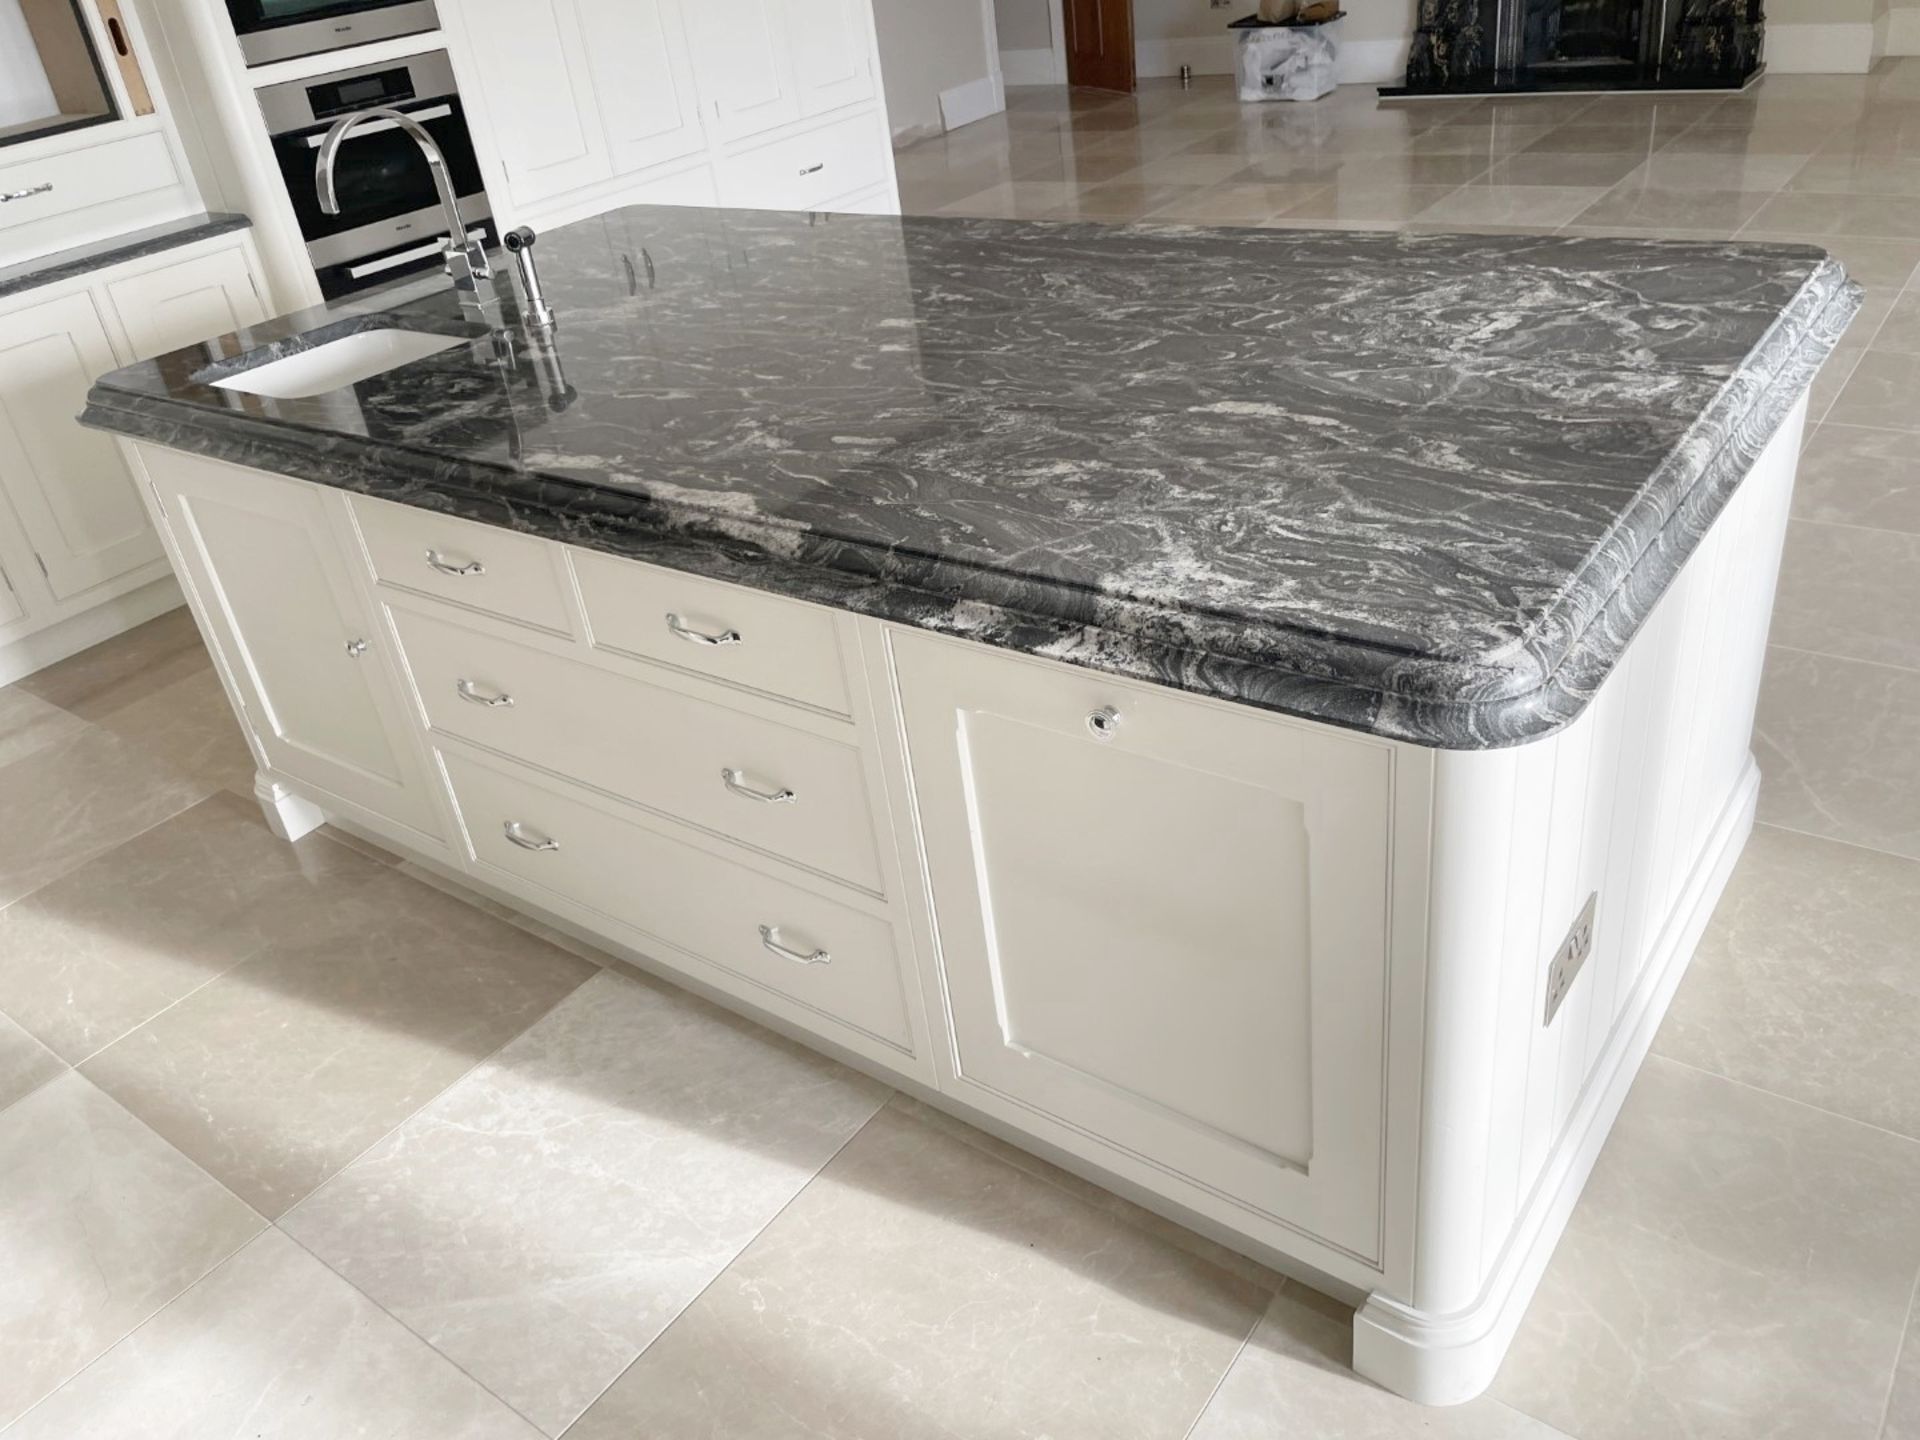 1 x Bespoke Handcrafted Shaker-style Fitted Kitchen Marble Surfaces, Island & Miele Appliances - Image 81 of 221